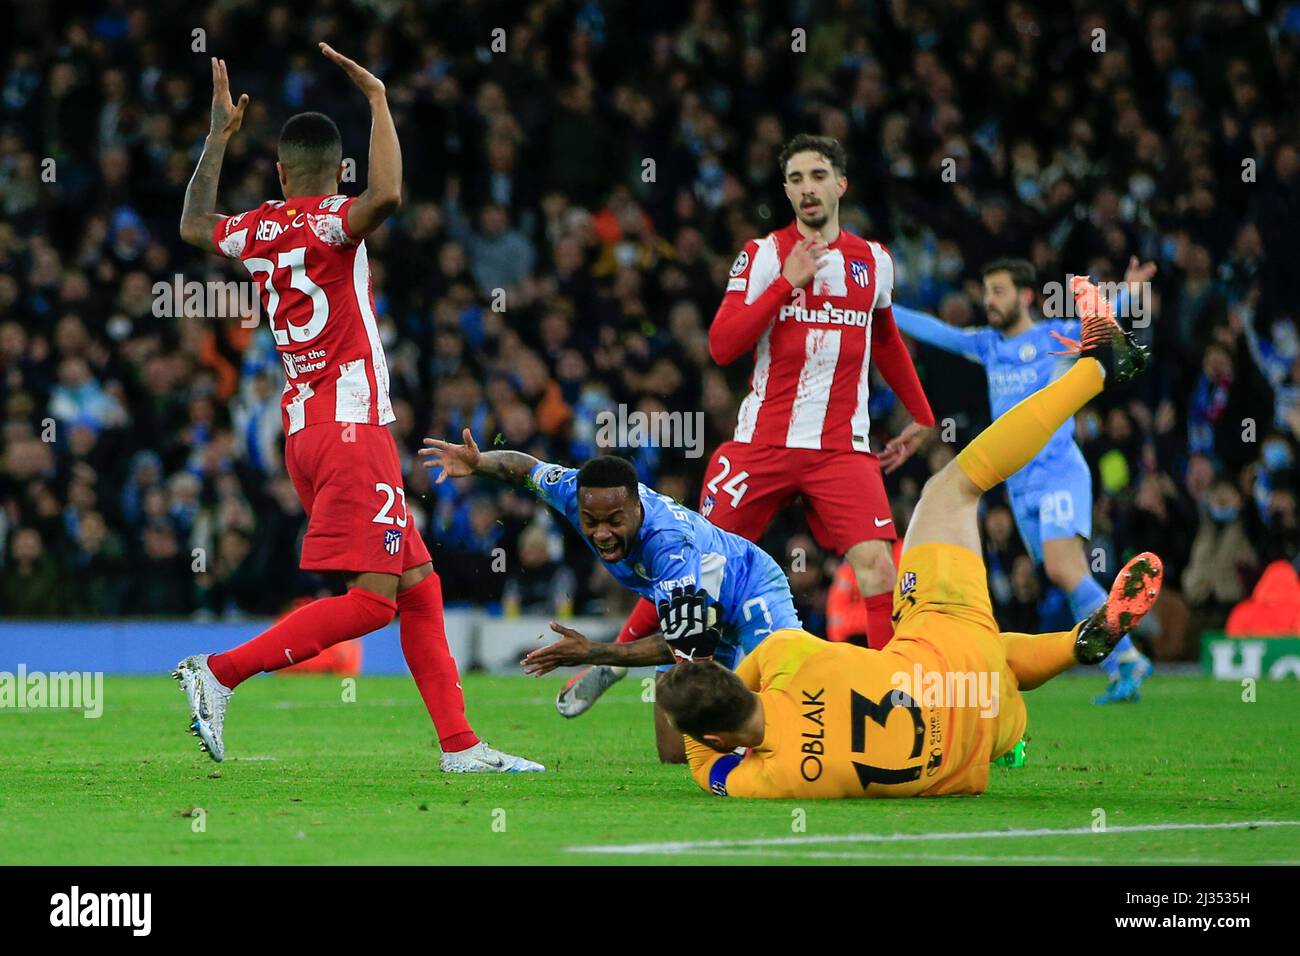 Manchester, UK. 05th Apr, 2022. Raheem Sterling #7 of Manchester City falls in the penalty area after a challenge by Reinildo Mandava #23 of Athletico Madrid but no penalty is given in Manchester, United Kingdom on 4/5/2022. (Photo by Conor Molloy/News Images/Sipa USA) Credit: Sipa USA/Alamy Live News Stock Photo